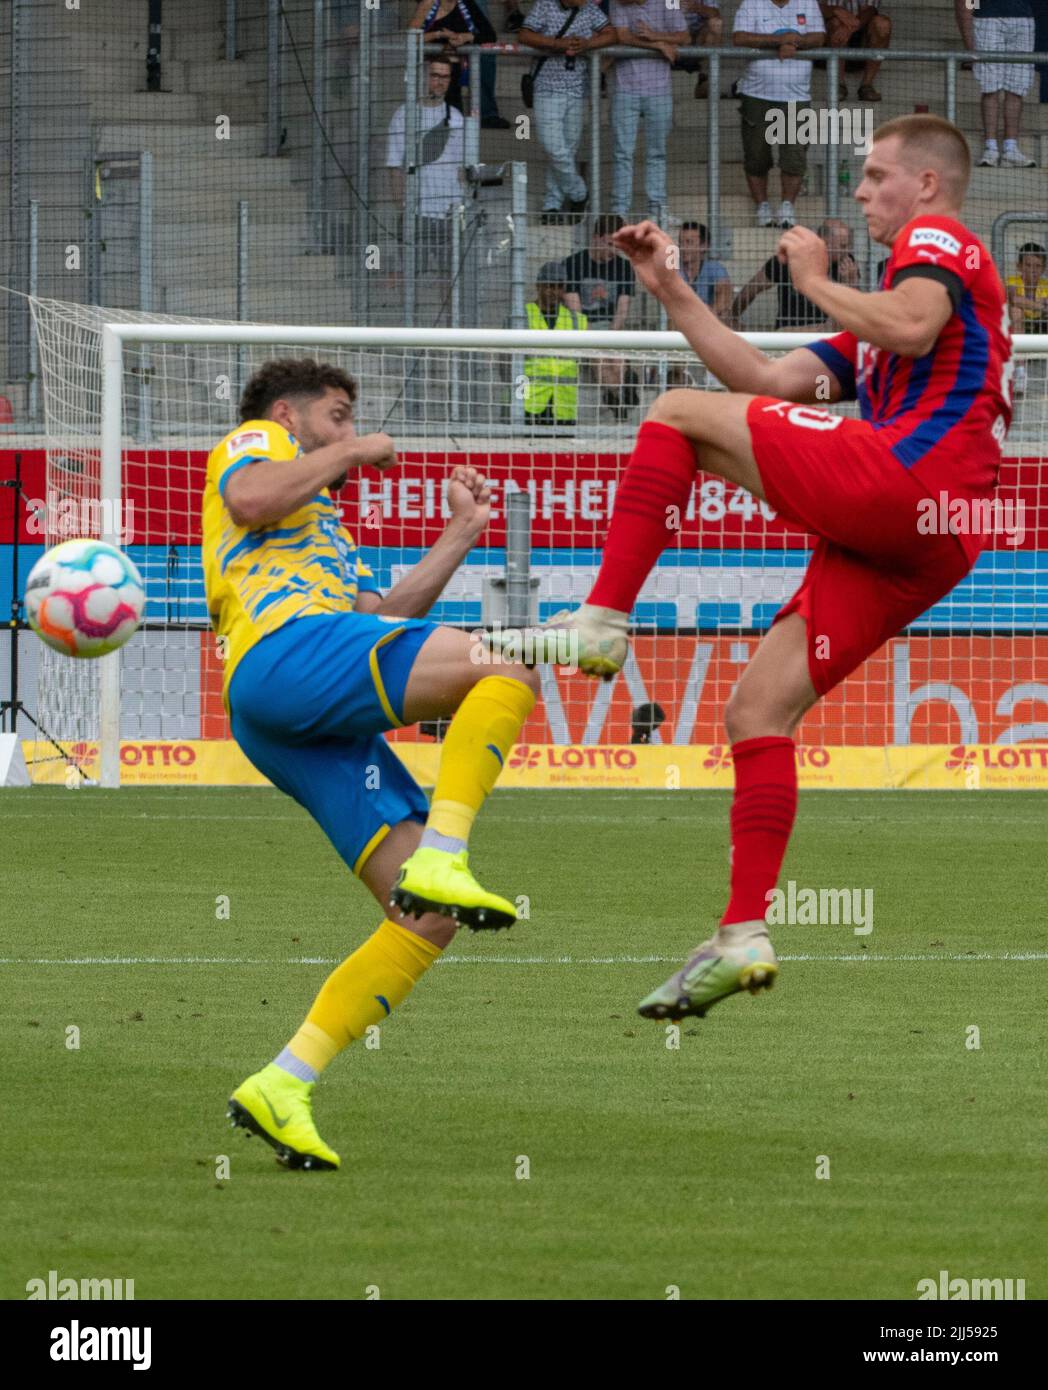 Heidenheim, Germany. 23rd July, 2022. Soccer: 2nd Bundesliga, 1. FC Heidenheim - Eintracht Braunschweig, Matchday 2, Voith Arena. Braunschweig's Fabio Kaufmann and Heidenheim's Dzenis Burnic fight for the ball. Credit: Stefan Puchner/dpa - IMPORTANT NOTE: In accordance with the requirements of the DFL Deutsche Fußball Liga and the DFB Deutscher Fußball-Bund, it is prohibited to use or have used photographs taken in the stadium and/or of the match in the form of sequence pictures and/or video-like photo series./dpa/Alamy Live News Stock Photo